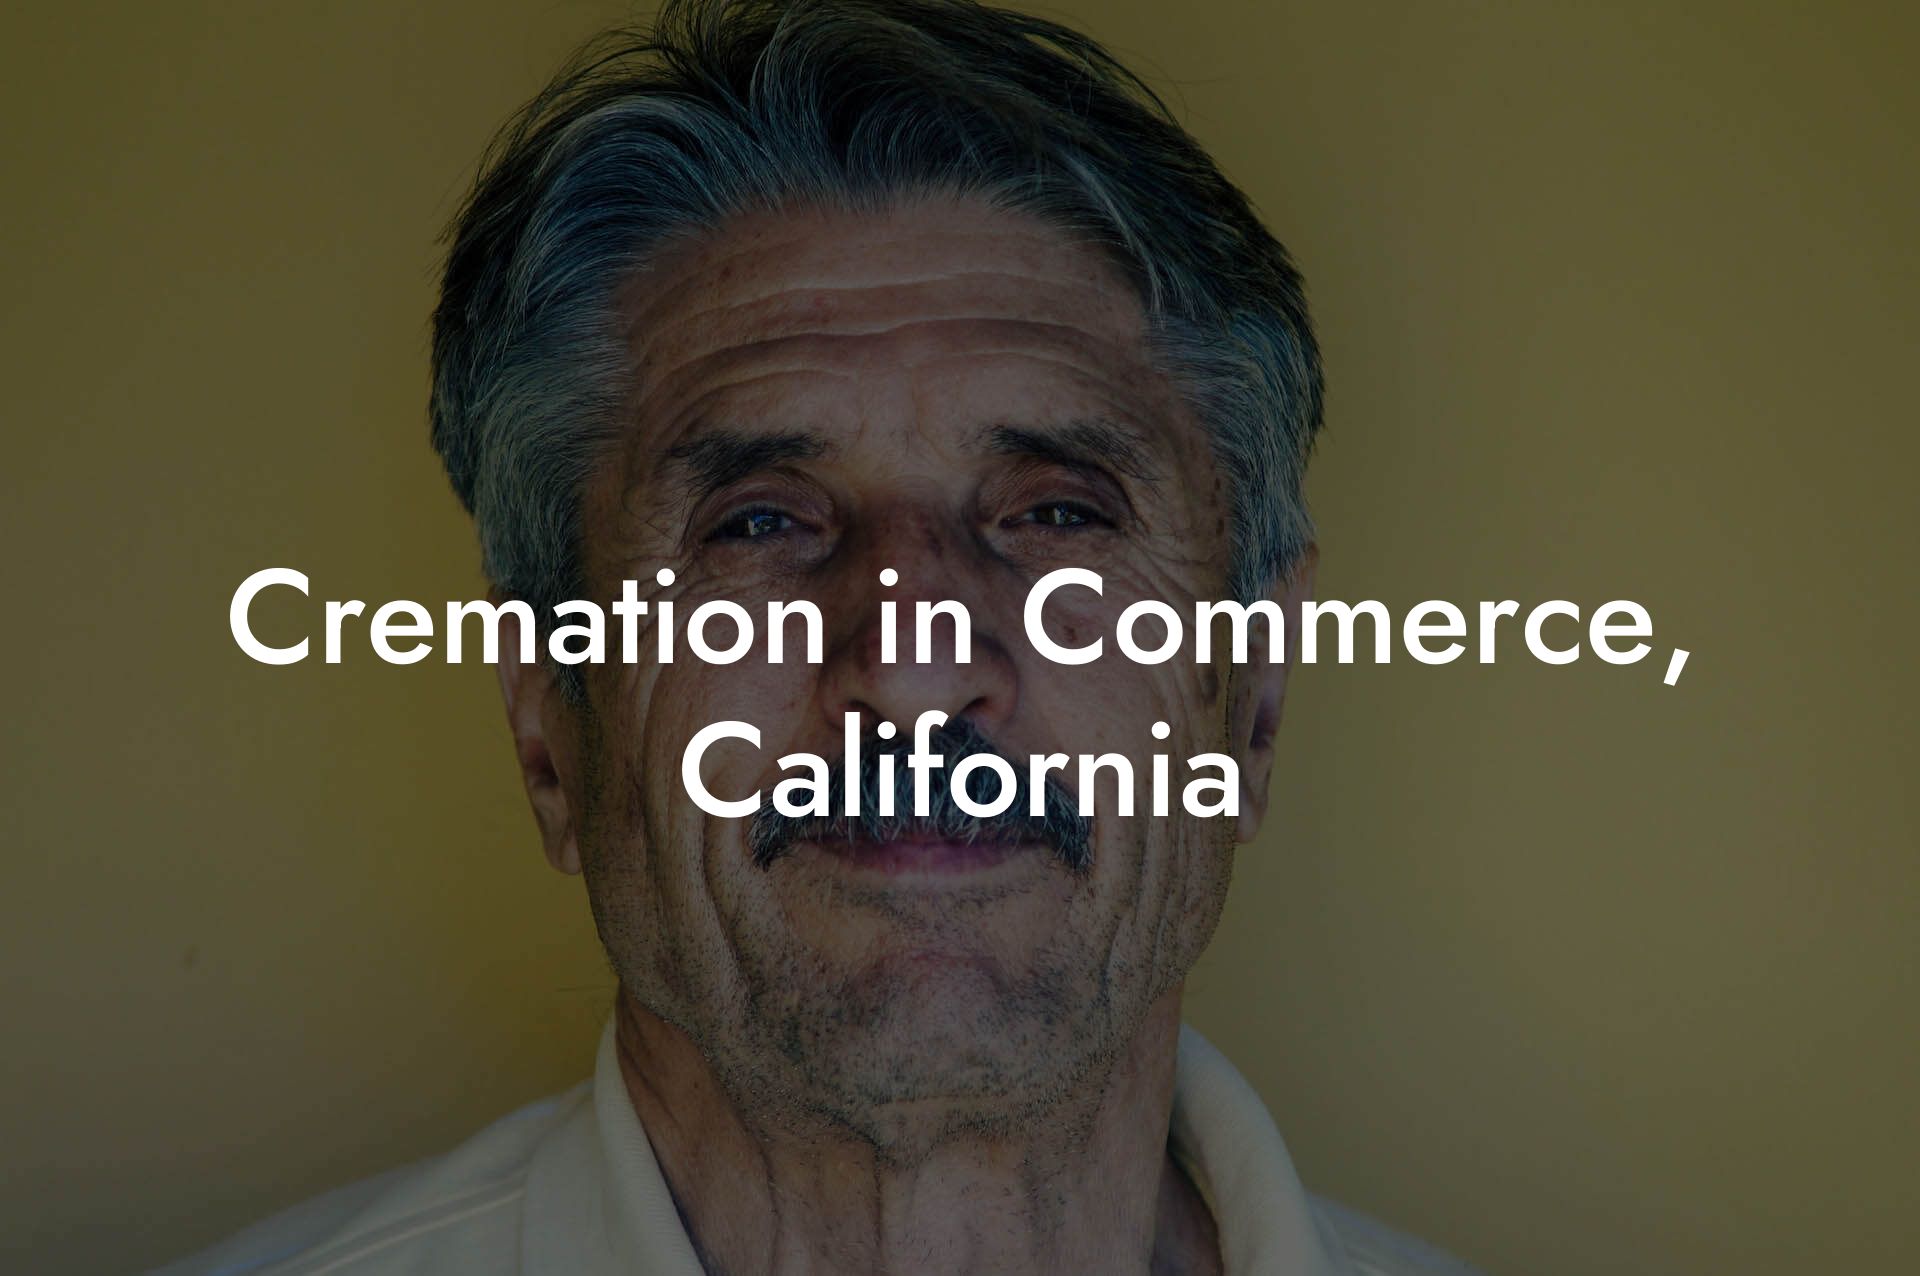 Cremation in Commerce, California